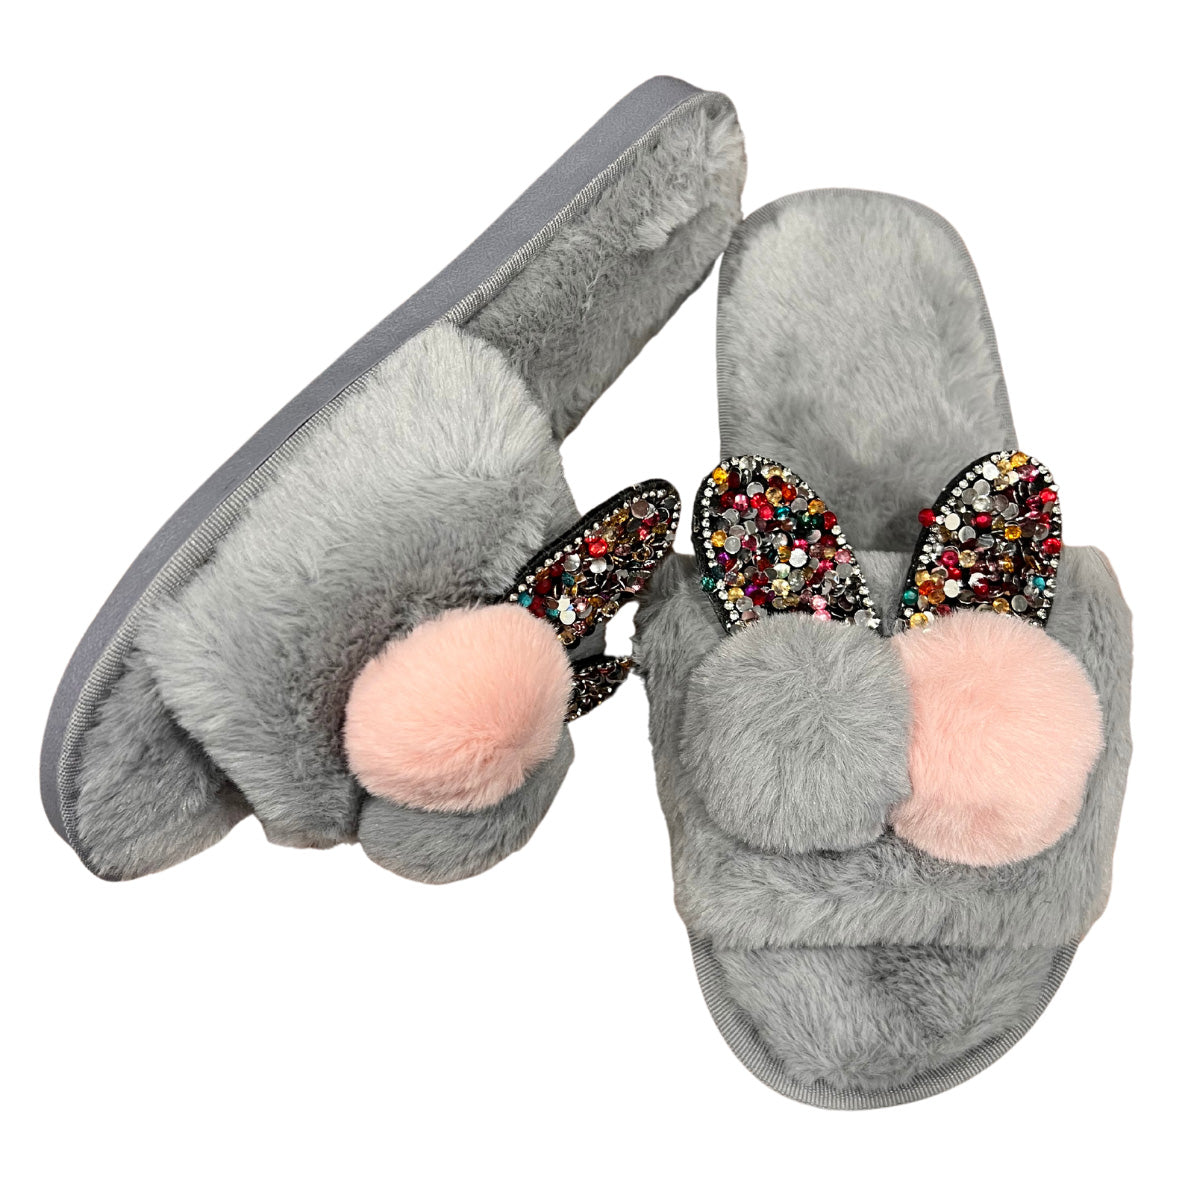 Super Soft Slipper / Sliders with sparkly jewel ears